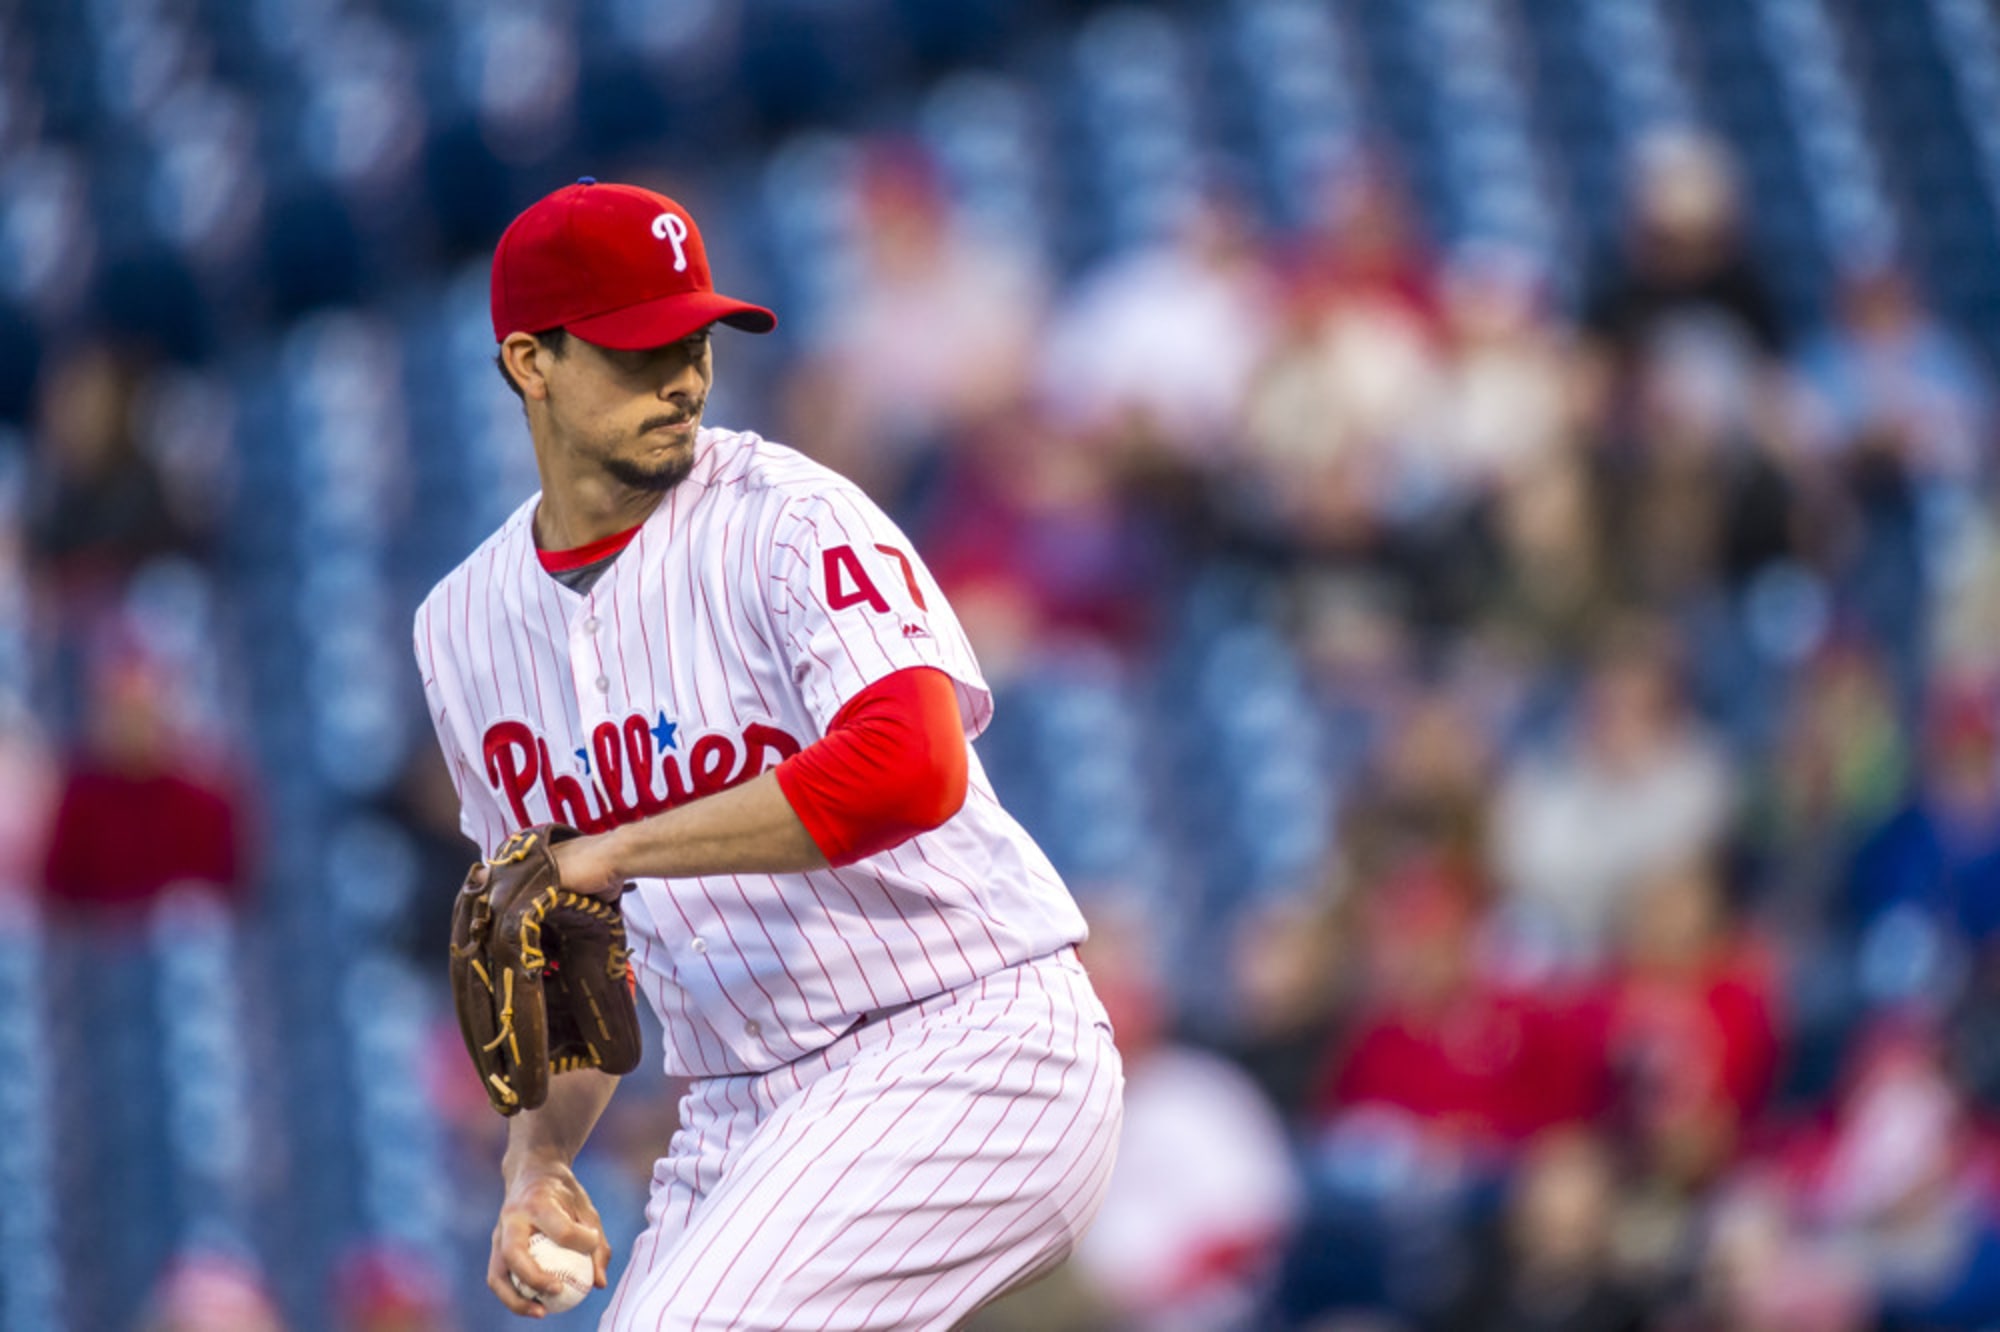 Phillies Shutout the Padres